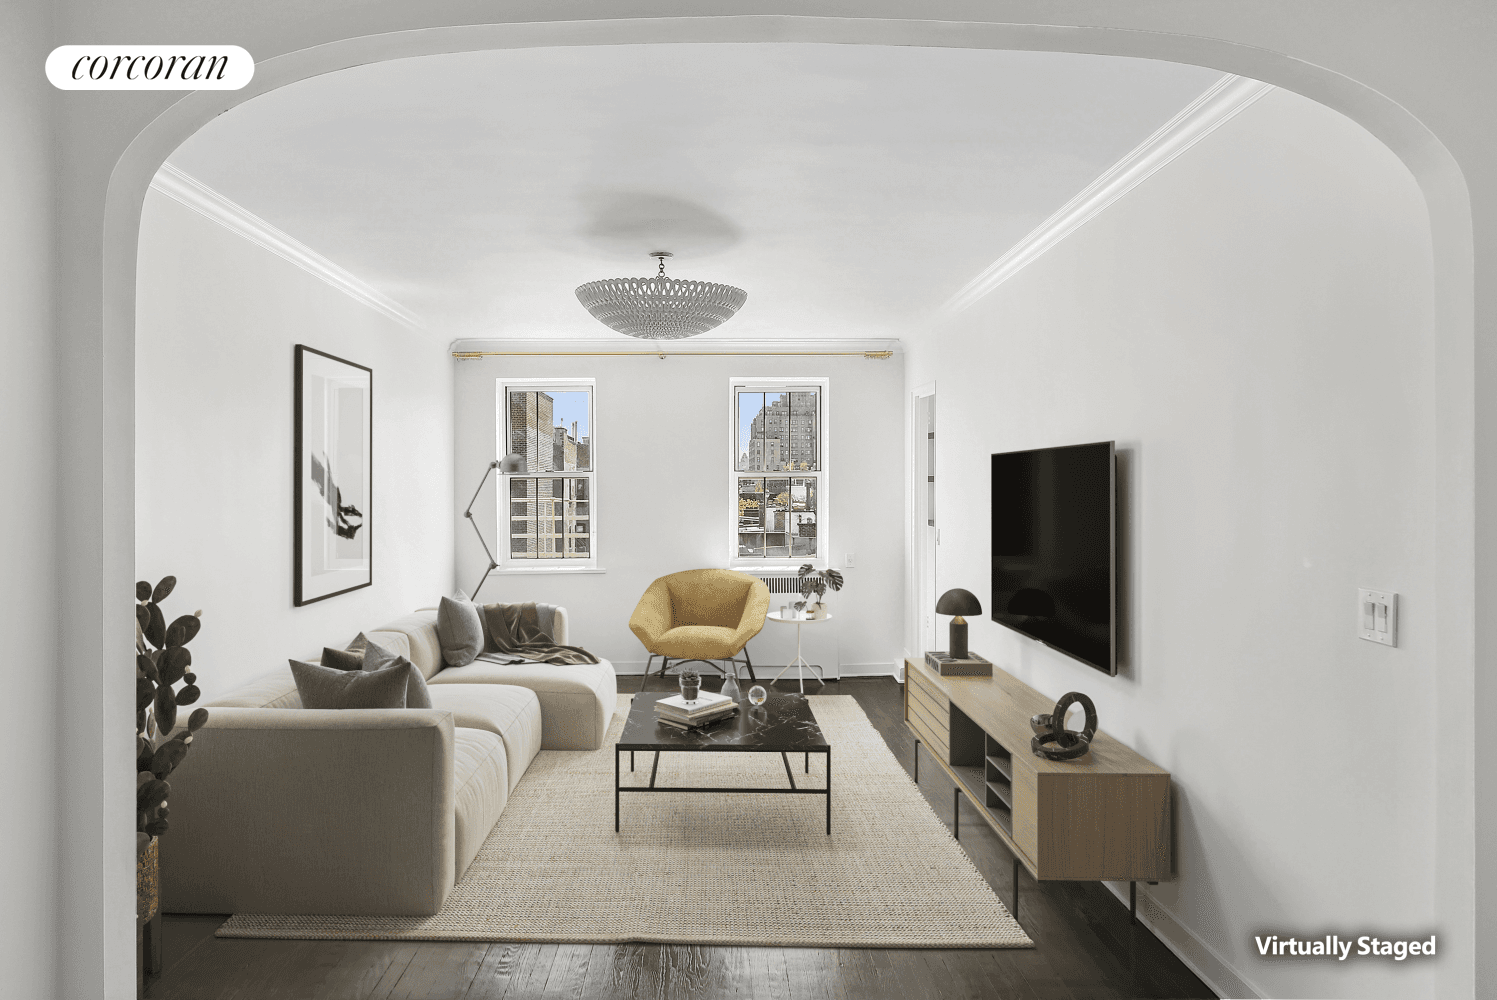 Prime Prewar West Village Living This gorgeous and newly renovated one 1 bedroom home offers sublime light and views, reflective of its top floor positioning overlooking one of New York's ...